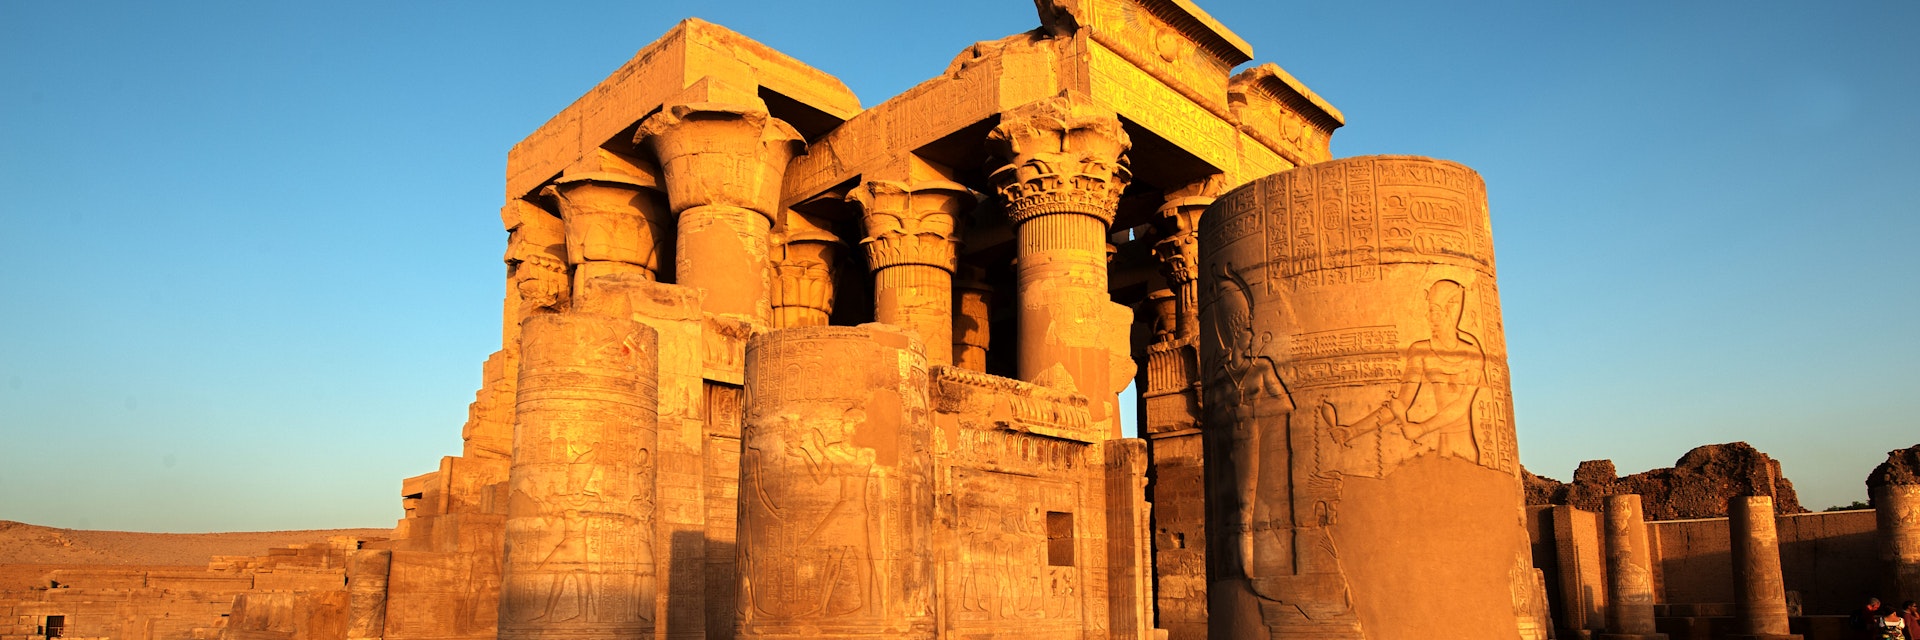 Temple Of Kom Ombo in Egypt.